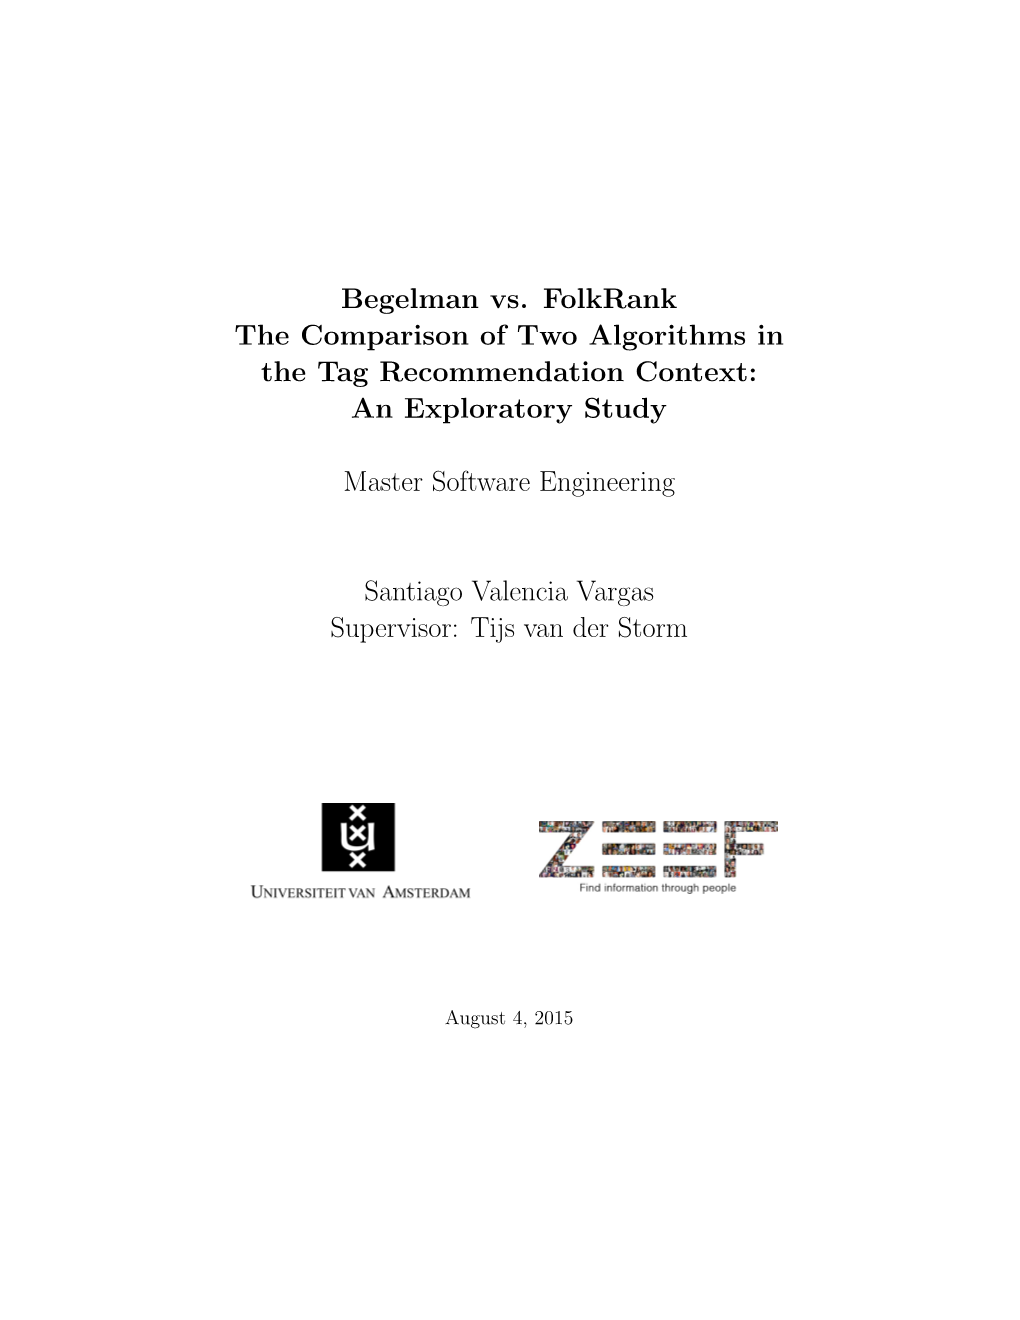 Begelman Vs. Folkrank the Comparison of Two Algorithms in the Tag Recommendation Context: an Exploratory Study